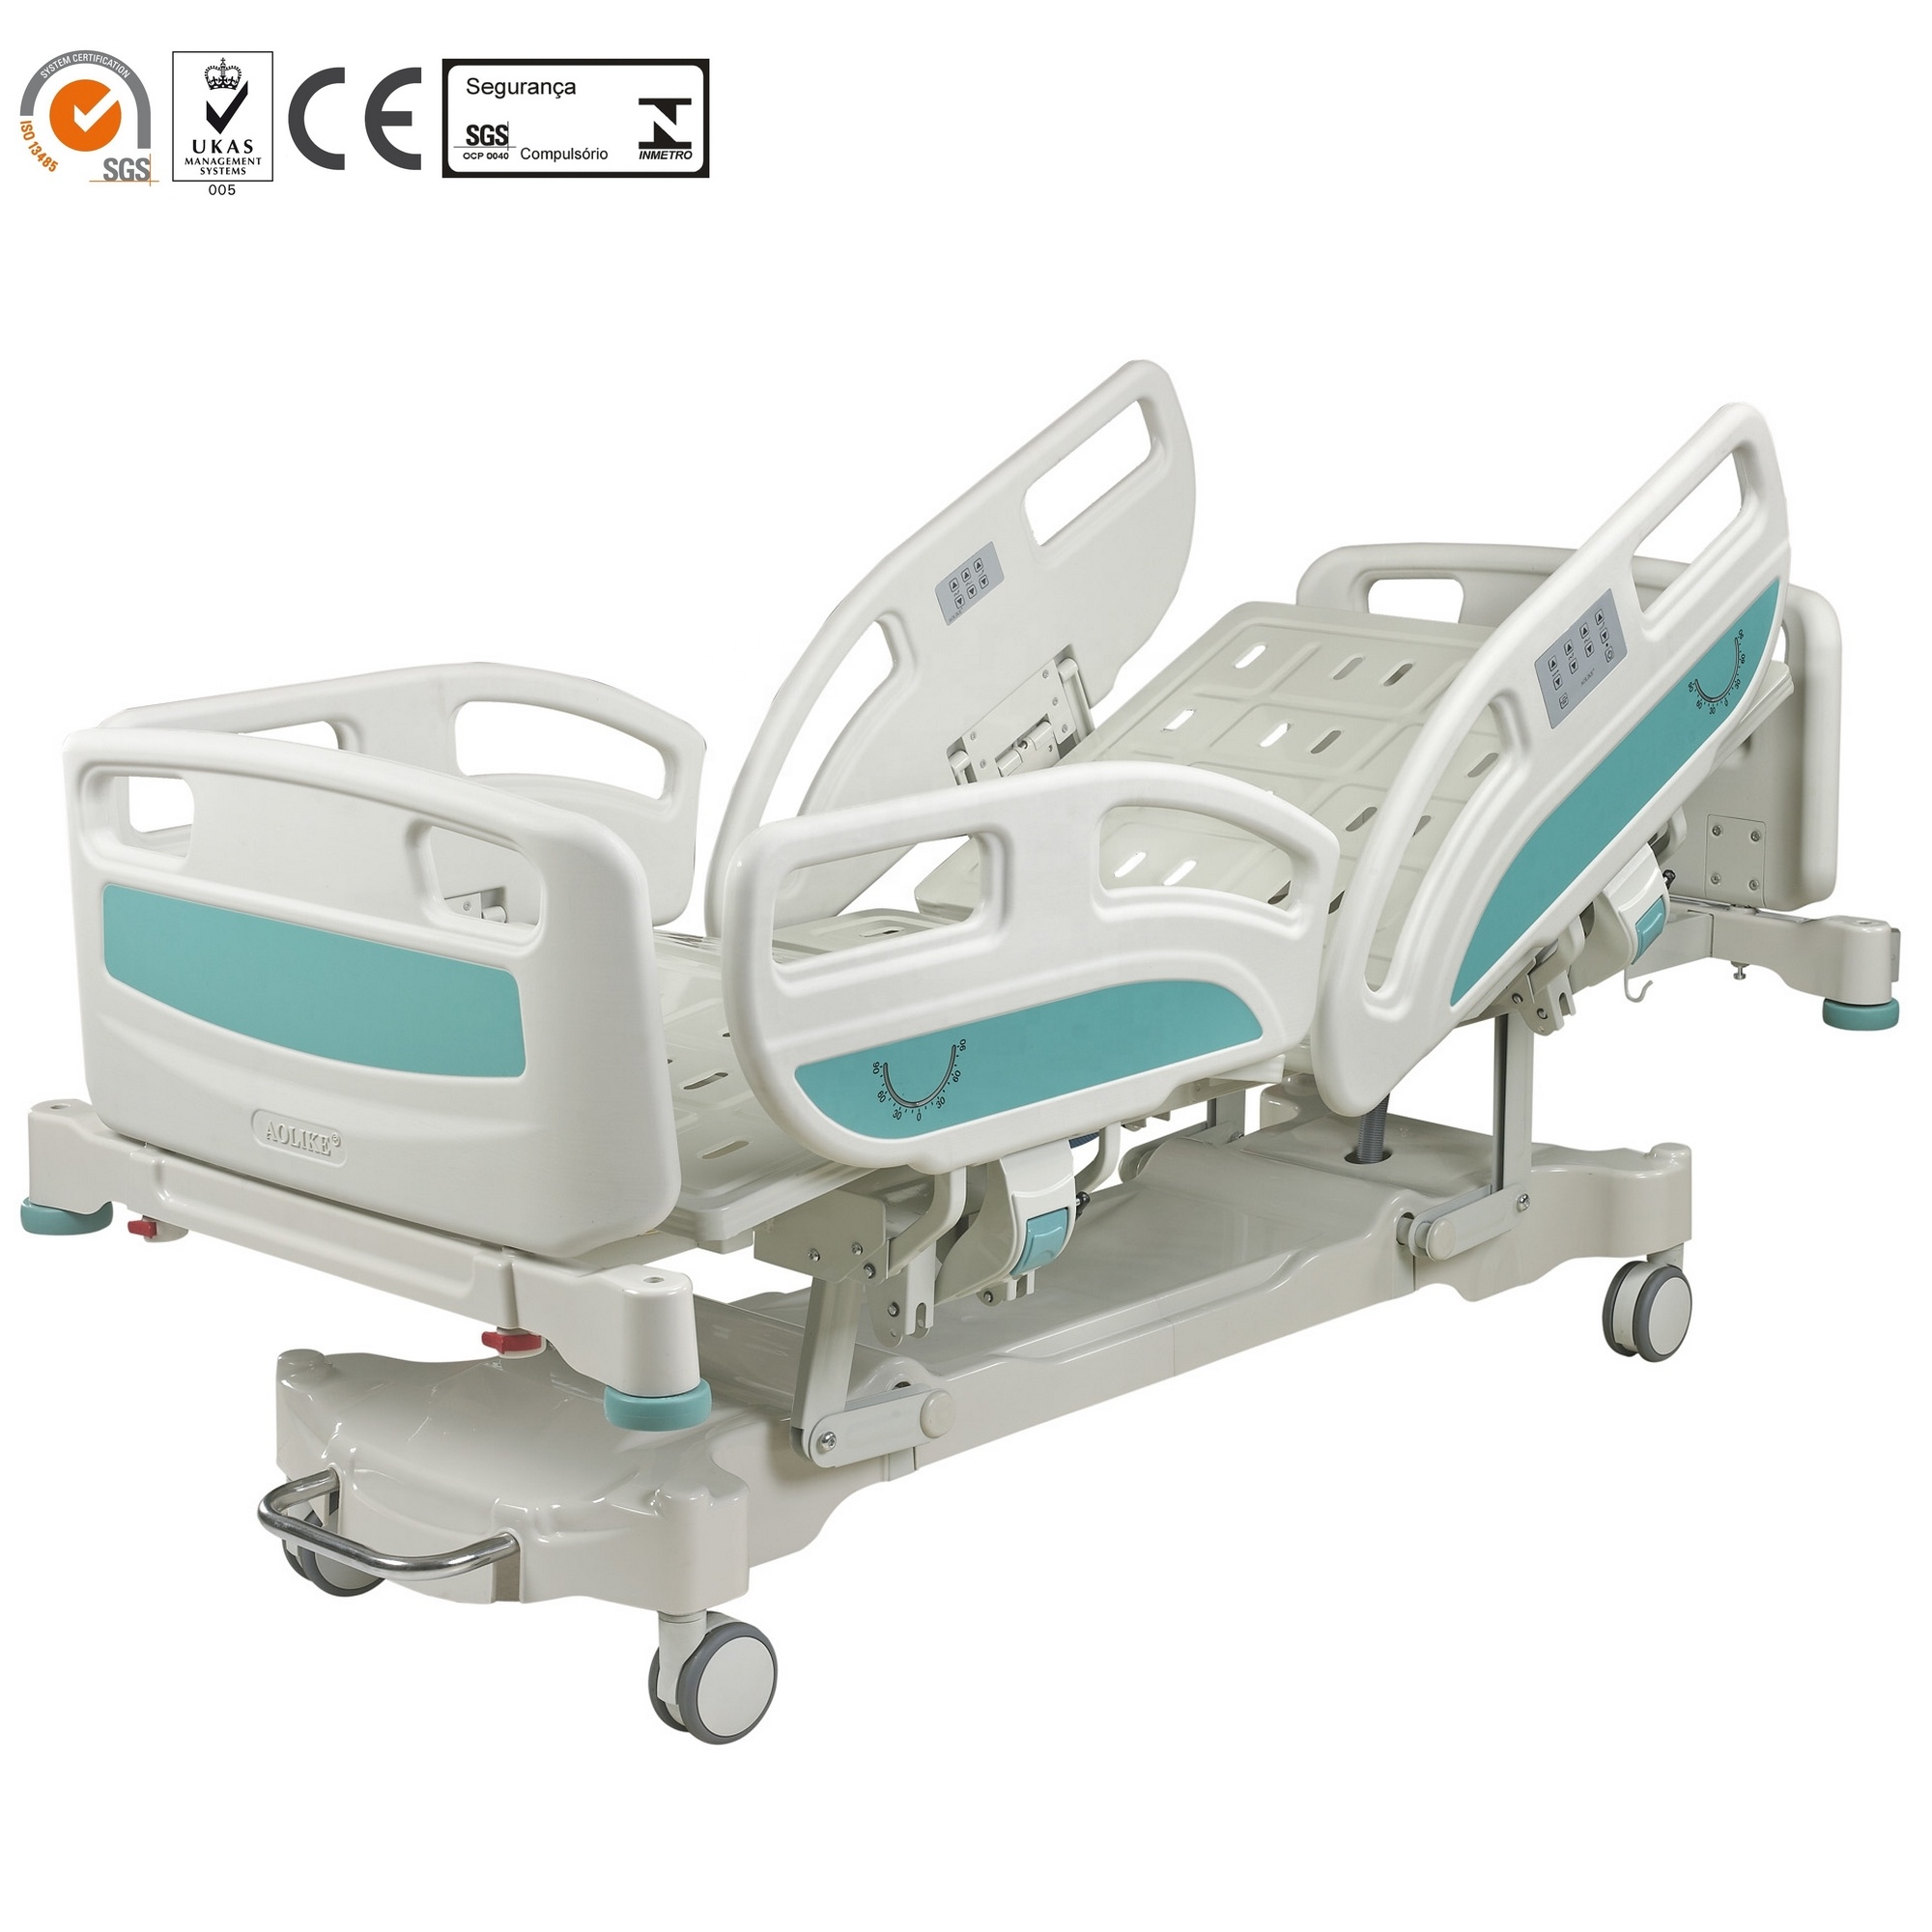 ALK-BA501EZE Electric ICU Bed 7 Days Delivery AOLIKE Medical Five Function Electric Intensive Care hospital bed